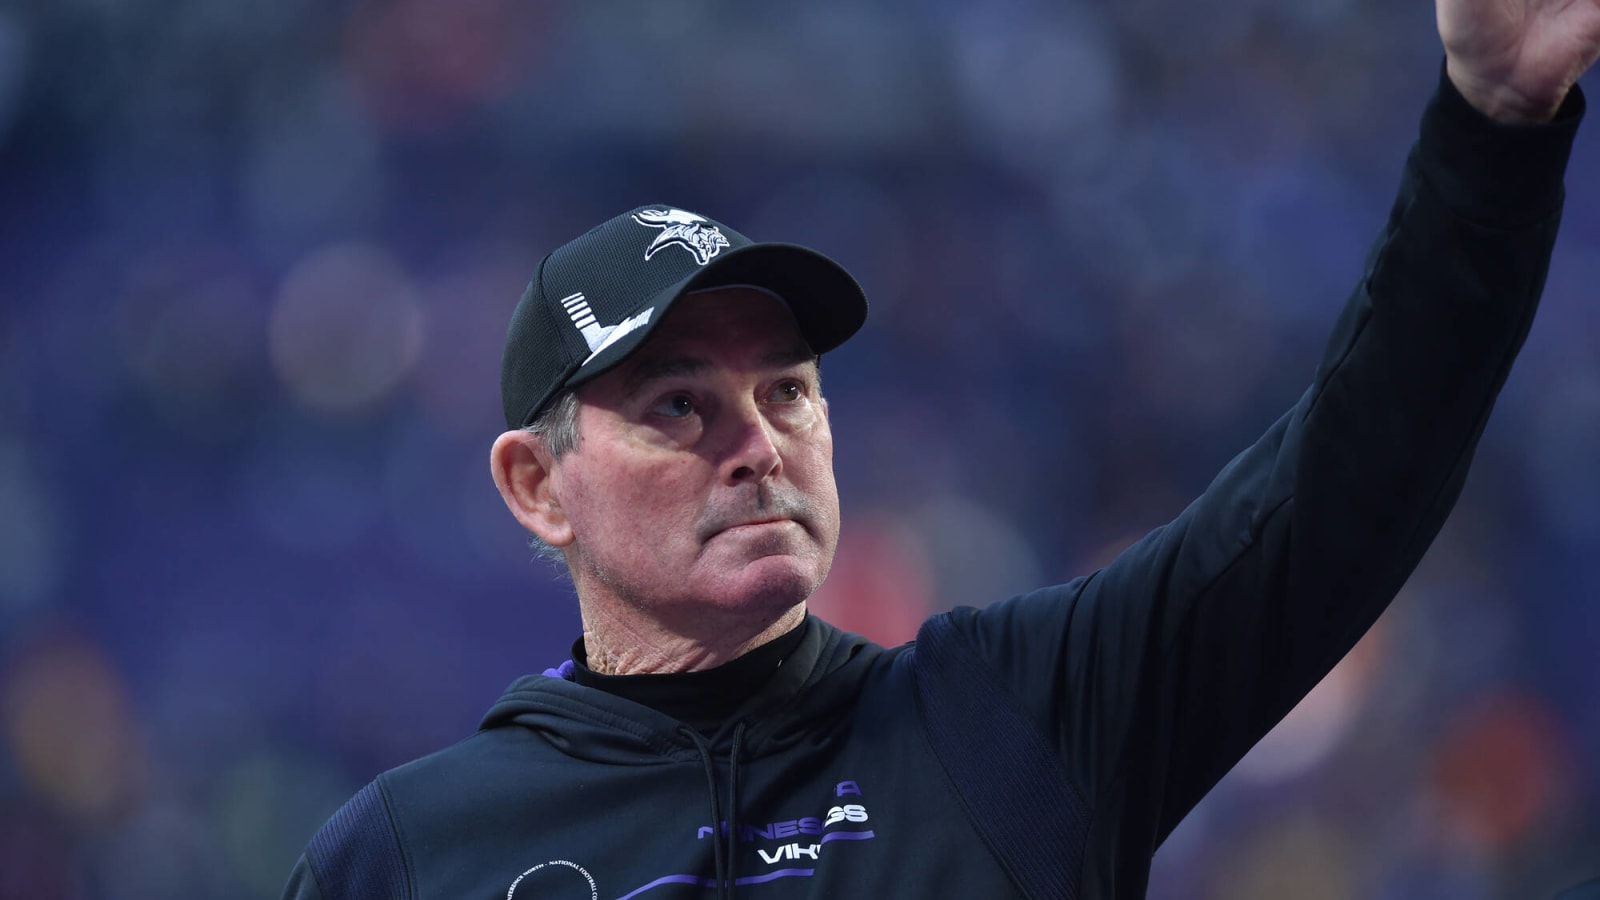 Following departure of Dan Quinn, who will be the Cowboys’ new DC?